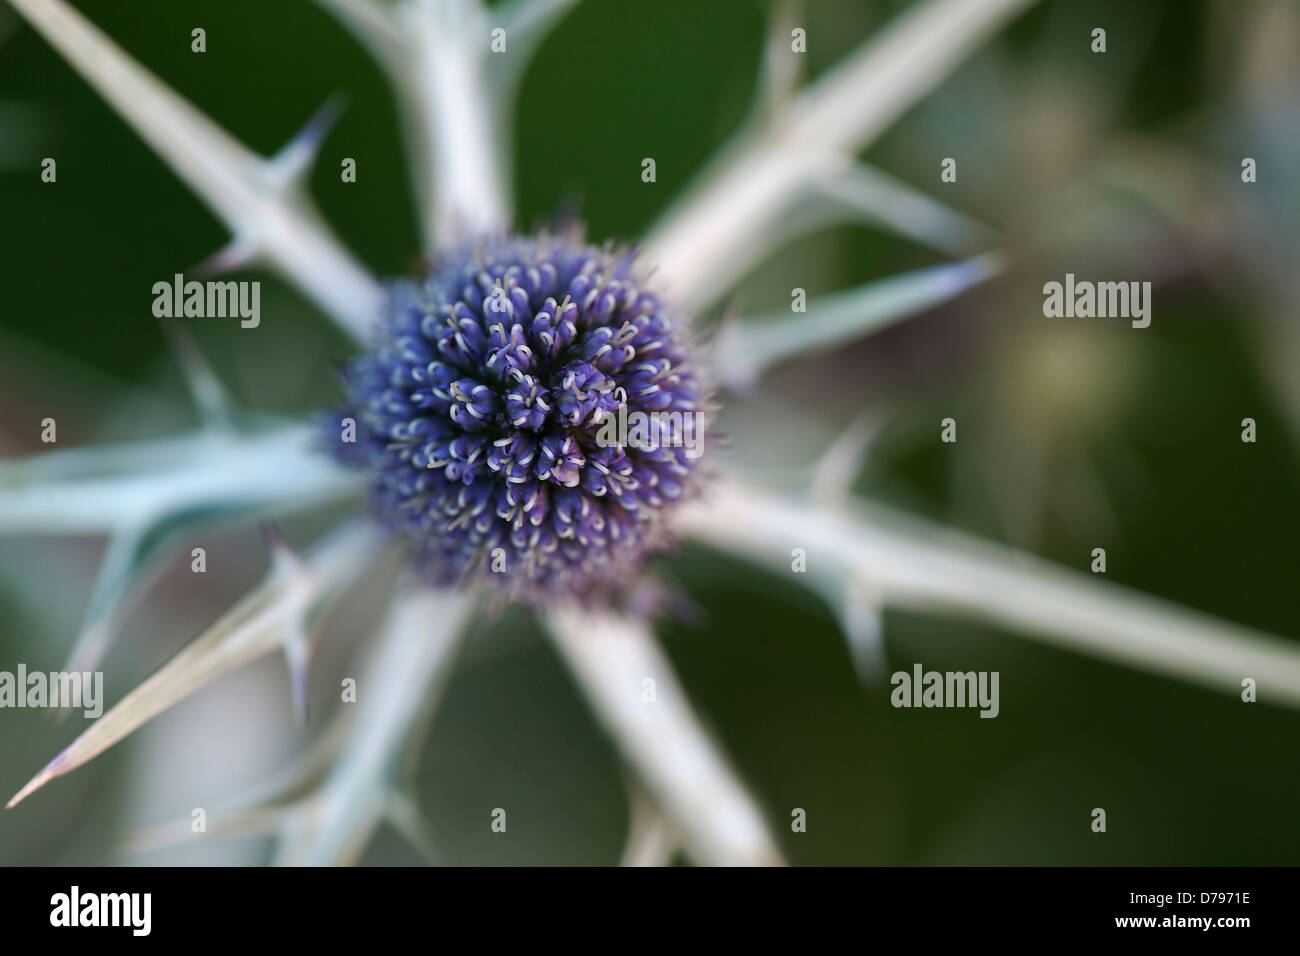 Sea holly, Eryngium variifolium. Spheical head of small, blue flowers surrounded by narrow, spiny, silver bracts. Stock Photo